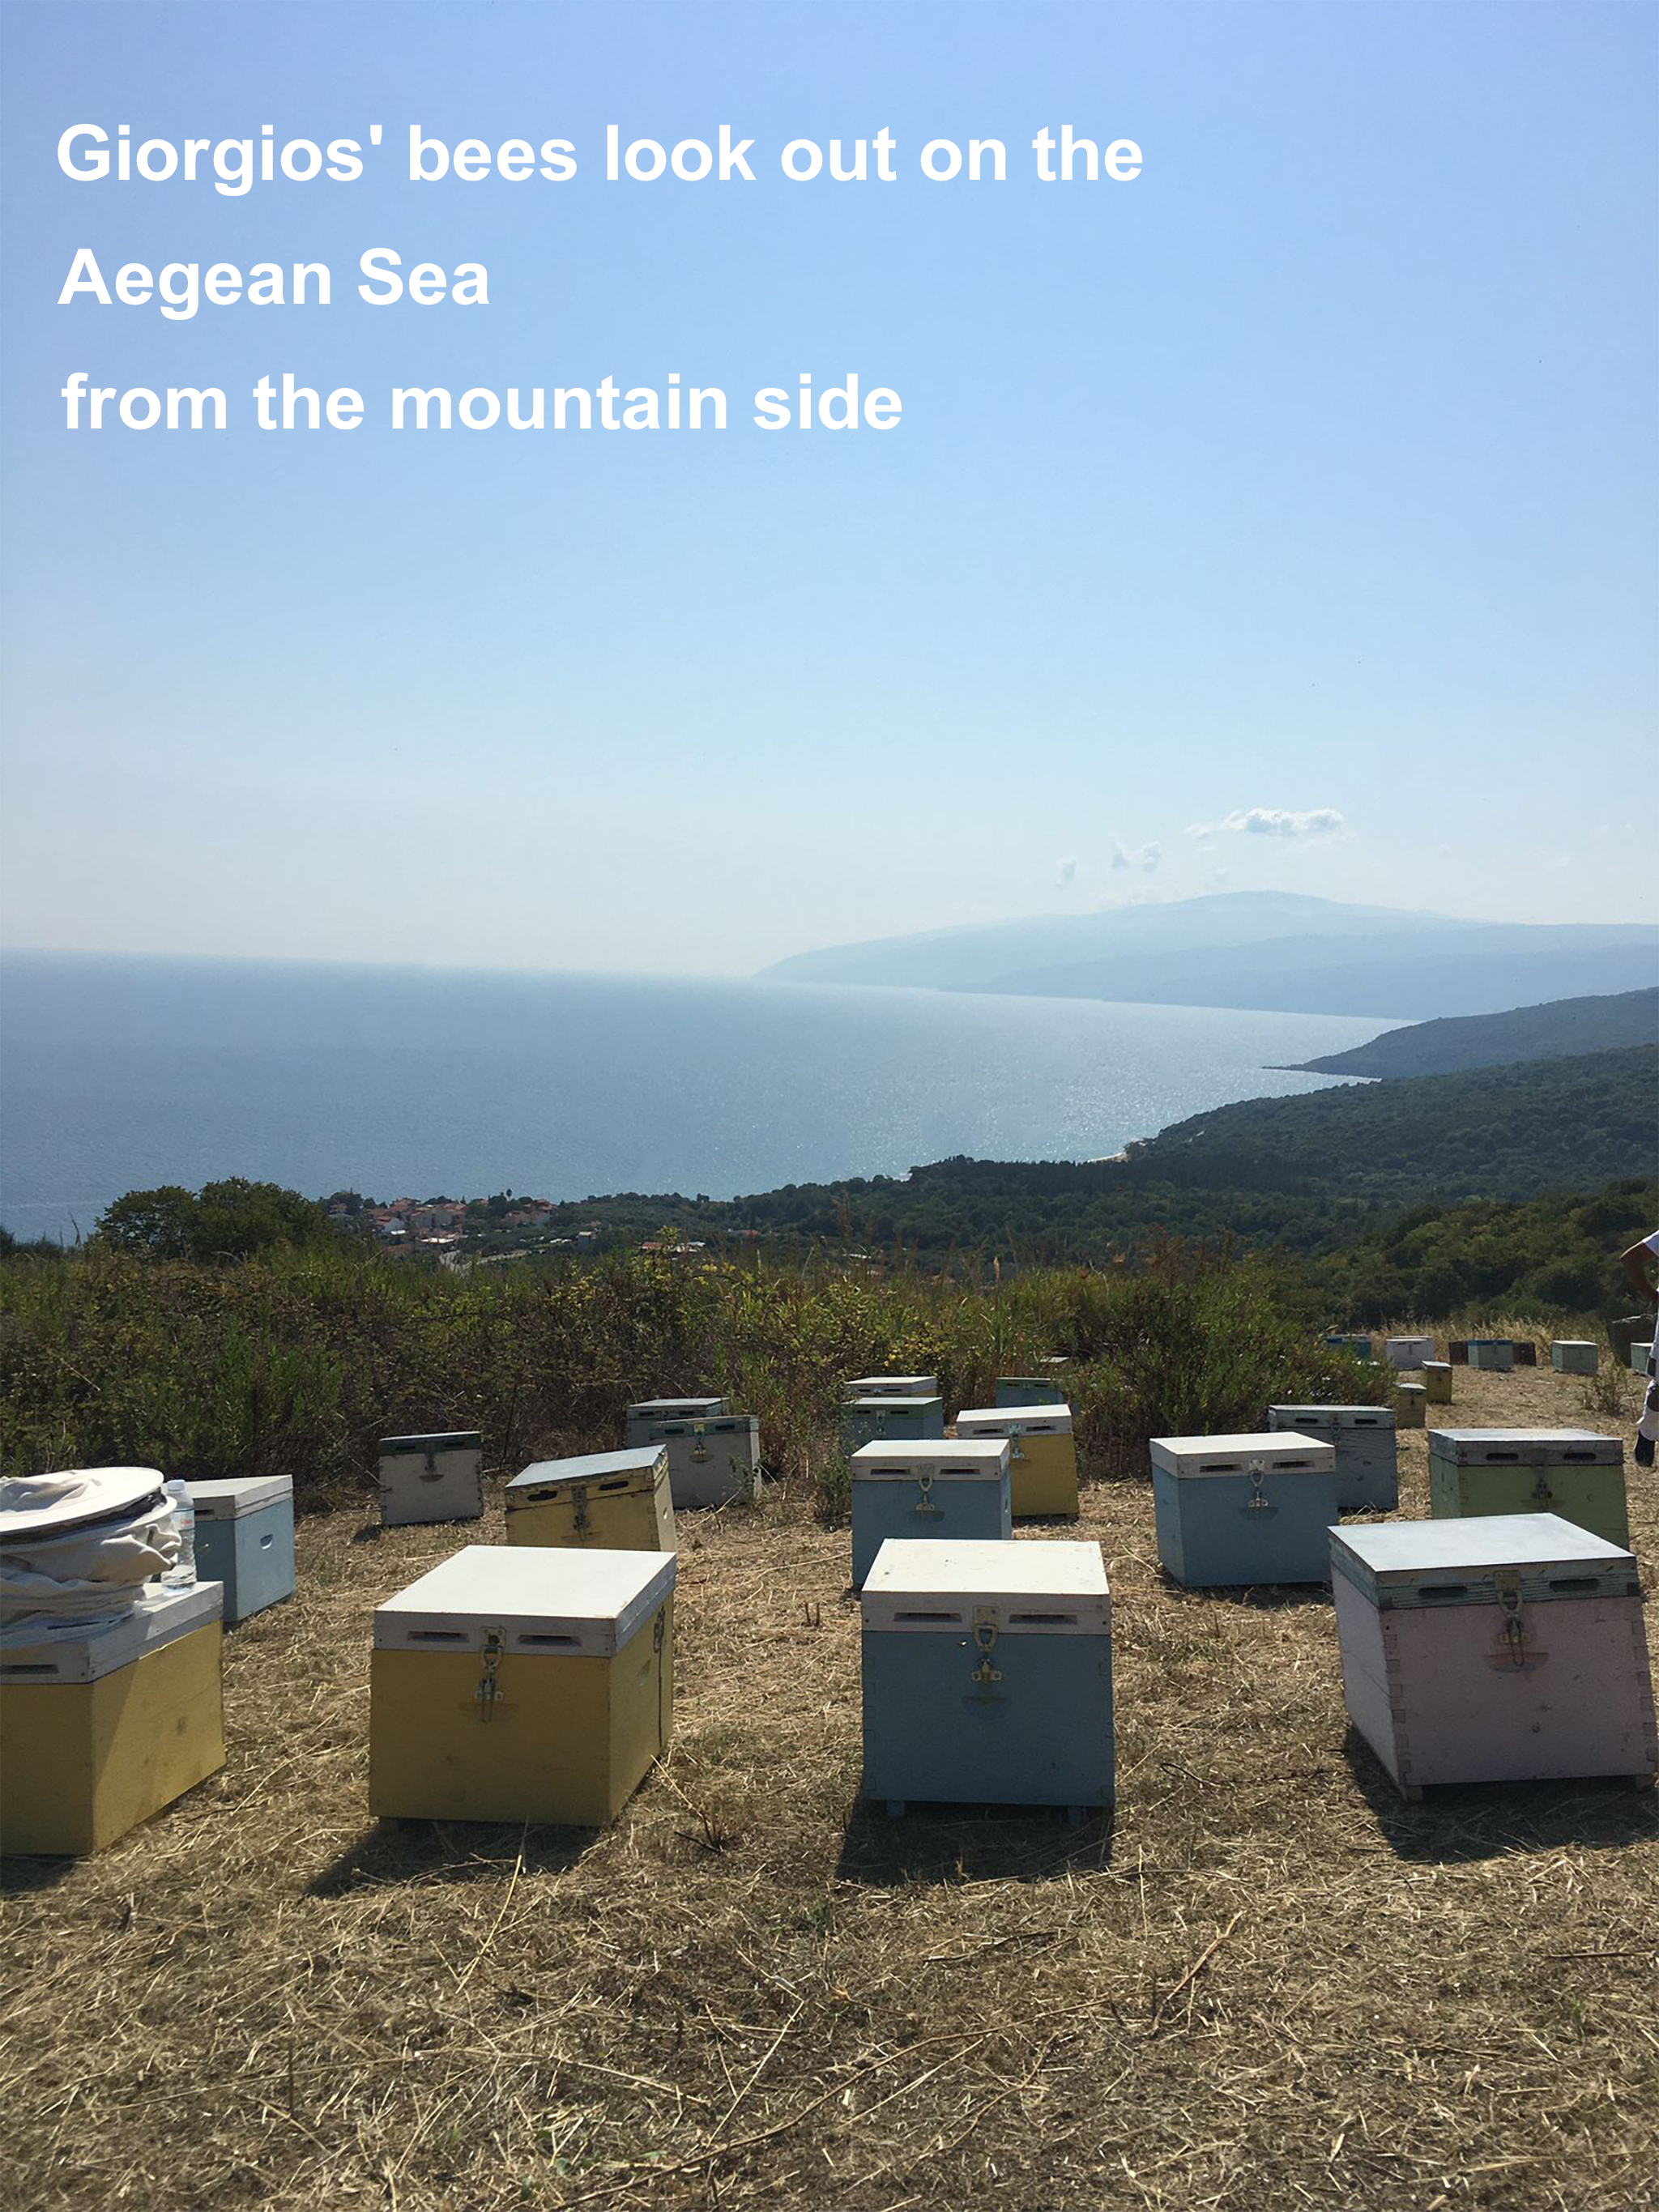 Giorgios' bees look out on the Aegean Sea from the beautiful wild Halkidiki Peninsula